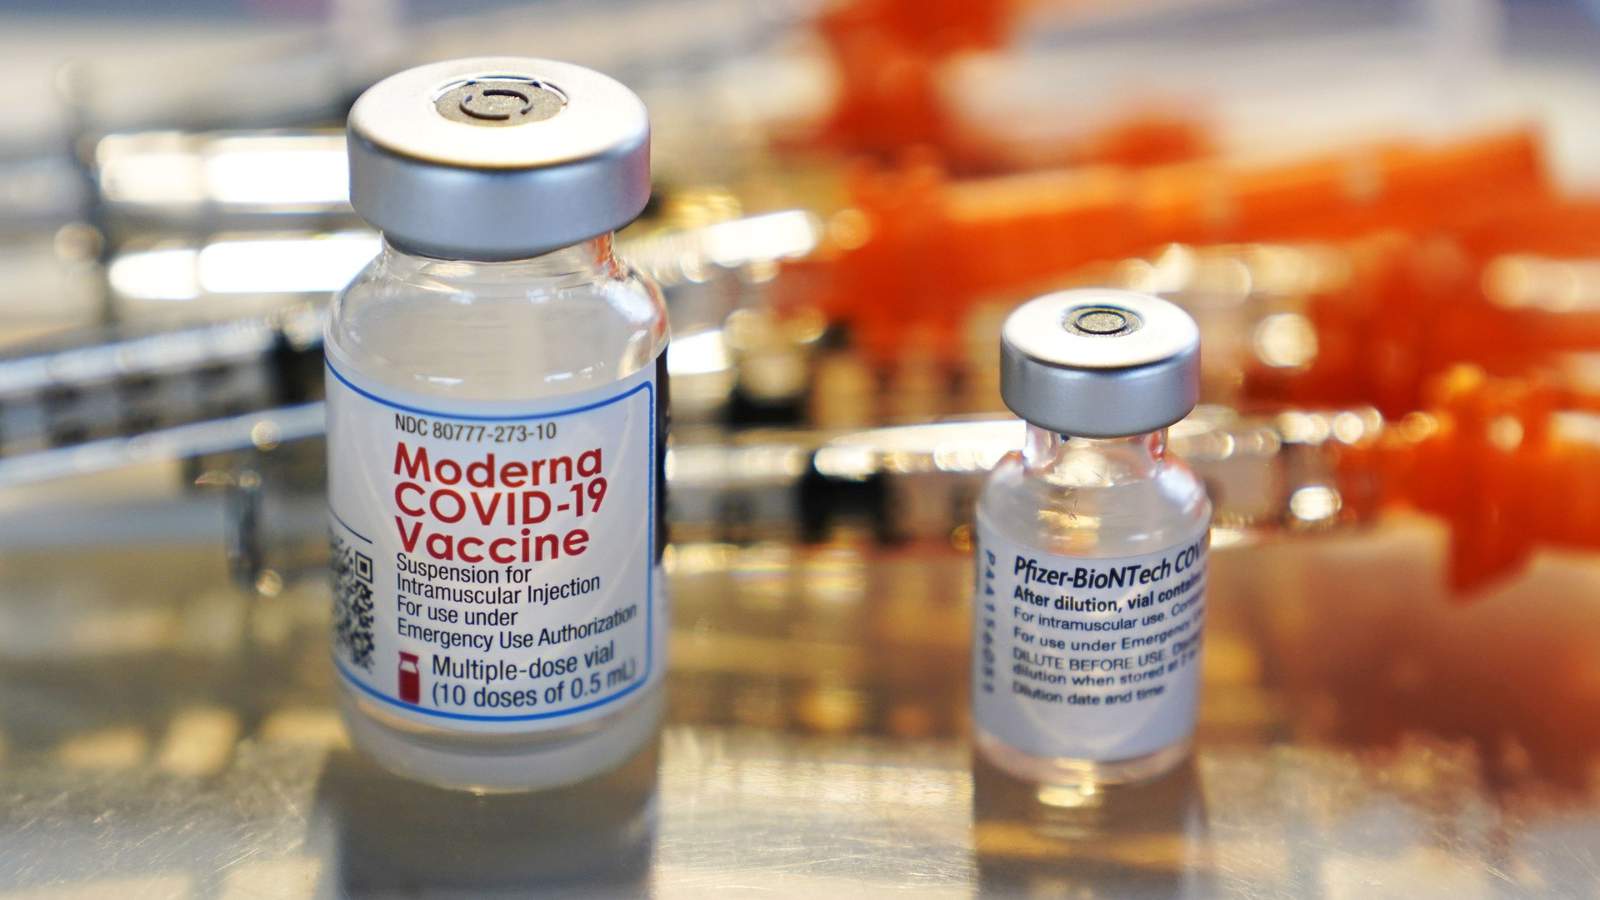 Here’s what herd immunity means and why it’s controversial